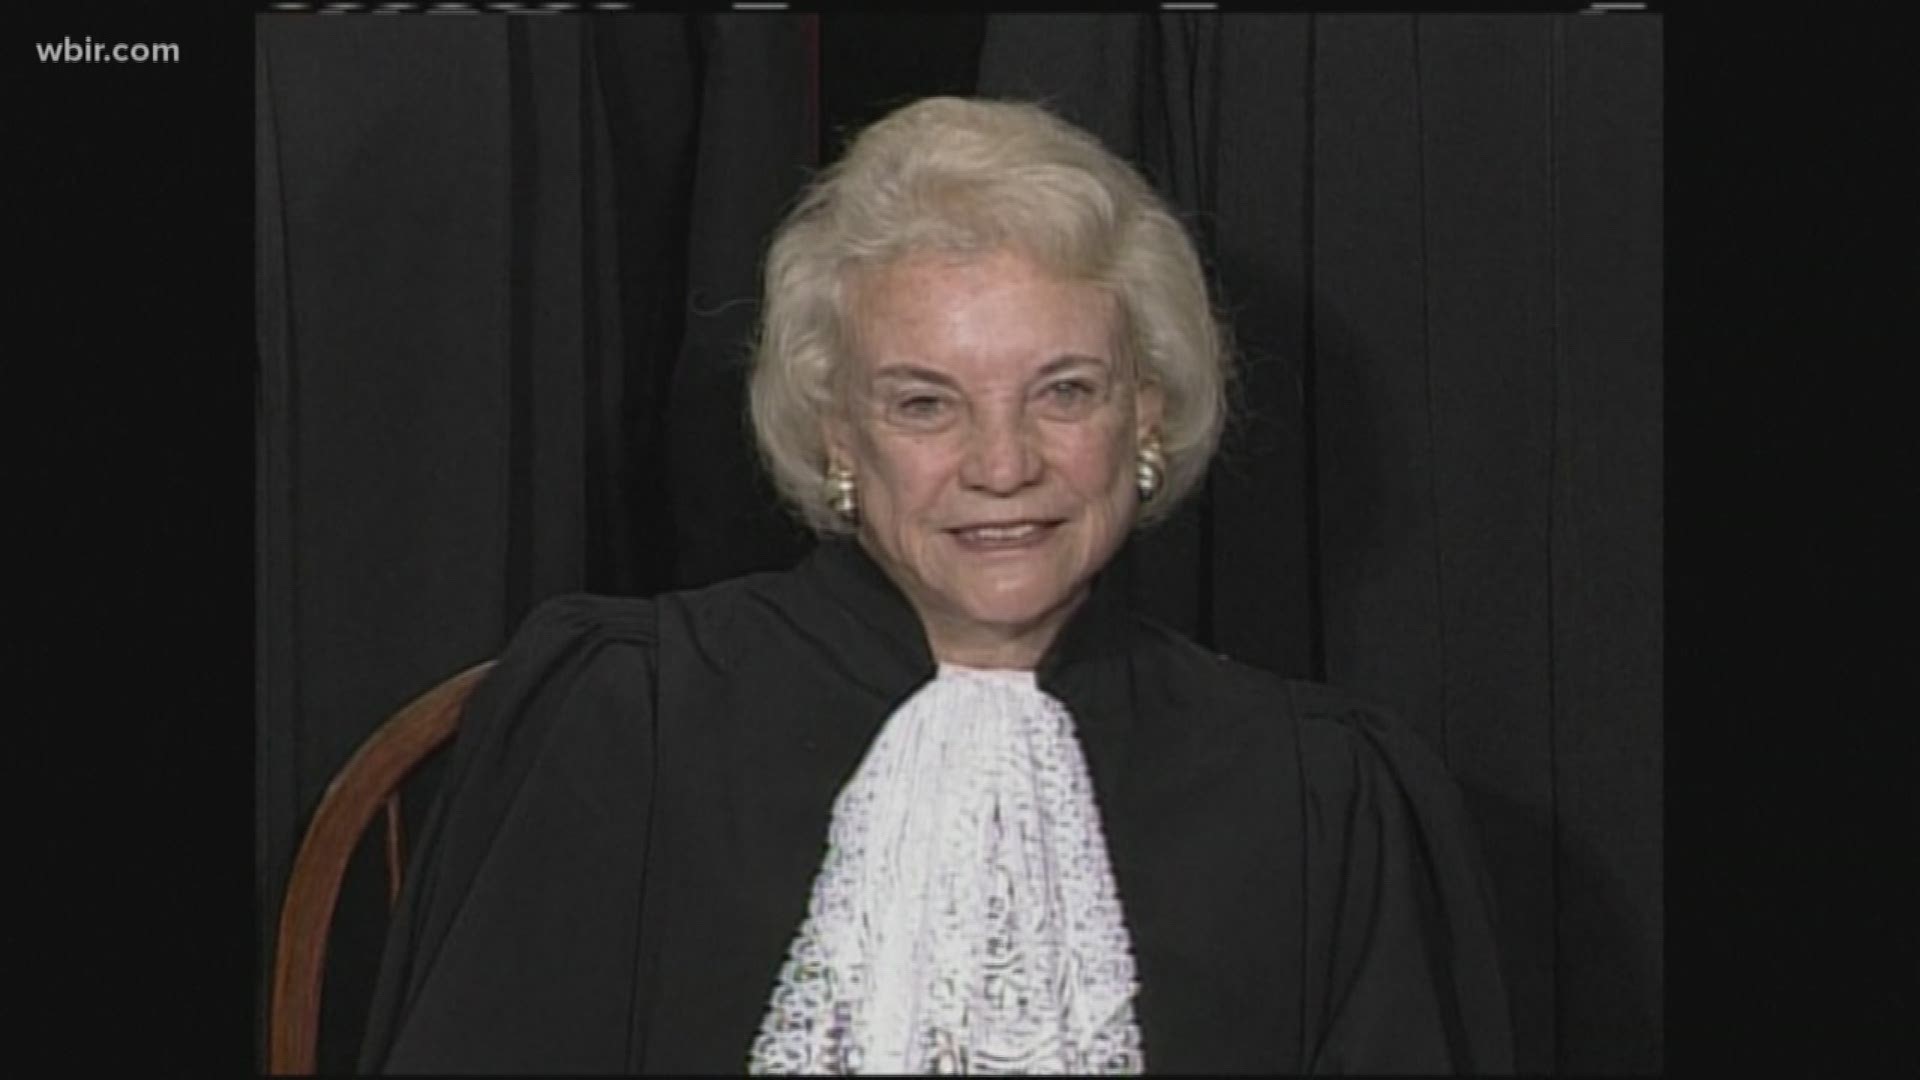 Former Supreme Court justice Sandra Day O'Connor has announced she's in the early stages of what is likely Alzheimer's disease.